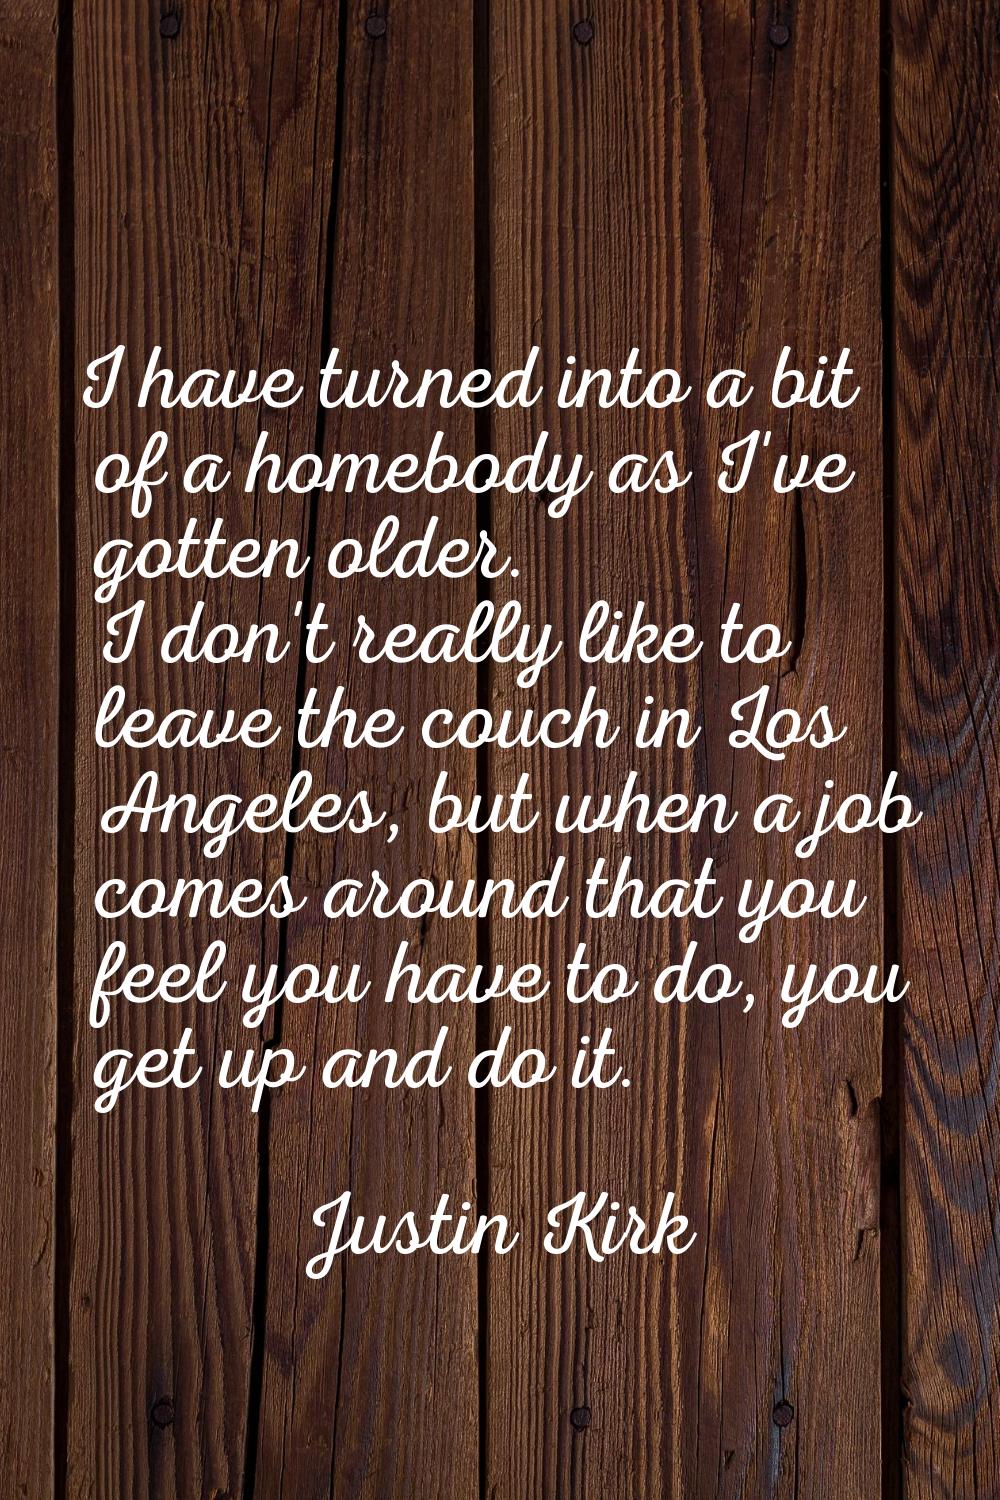 I have turned into a bit of a homebody as I've gotten older. I don't really like to leave the couch